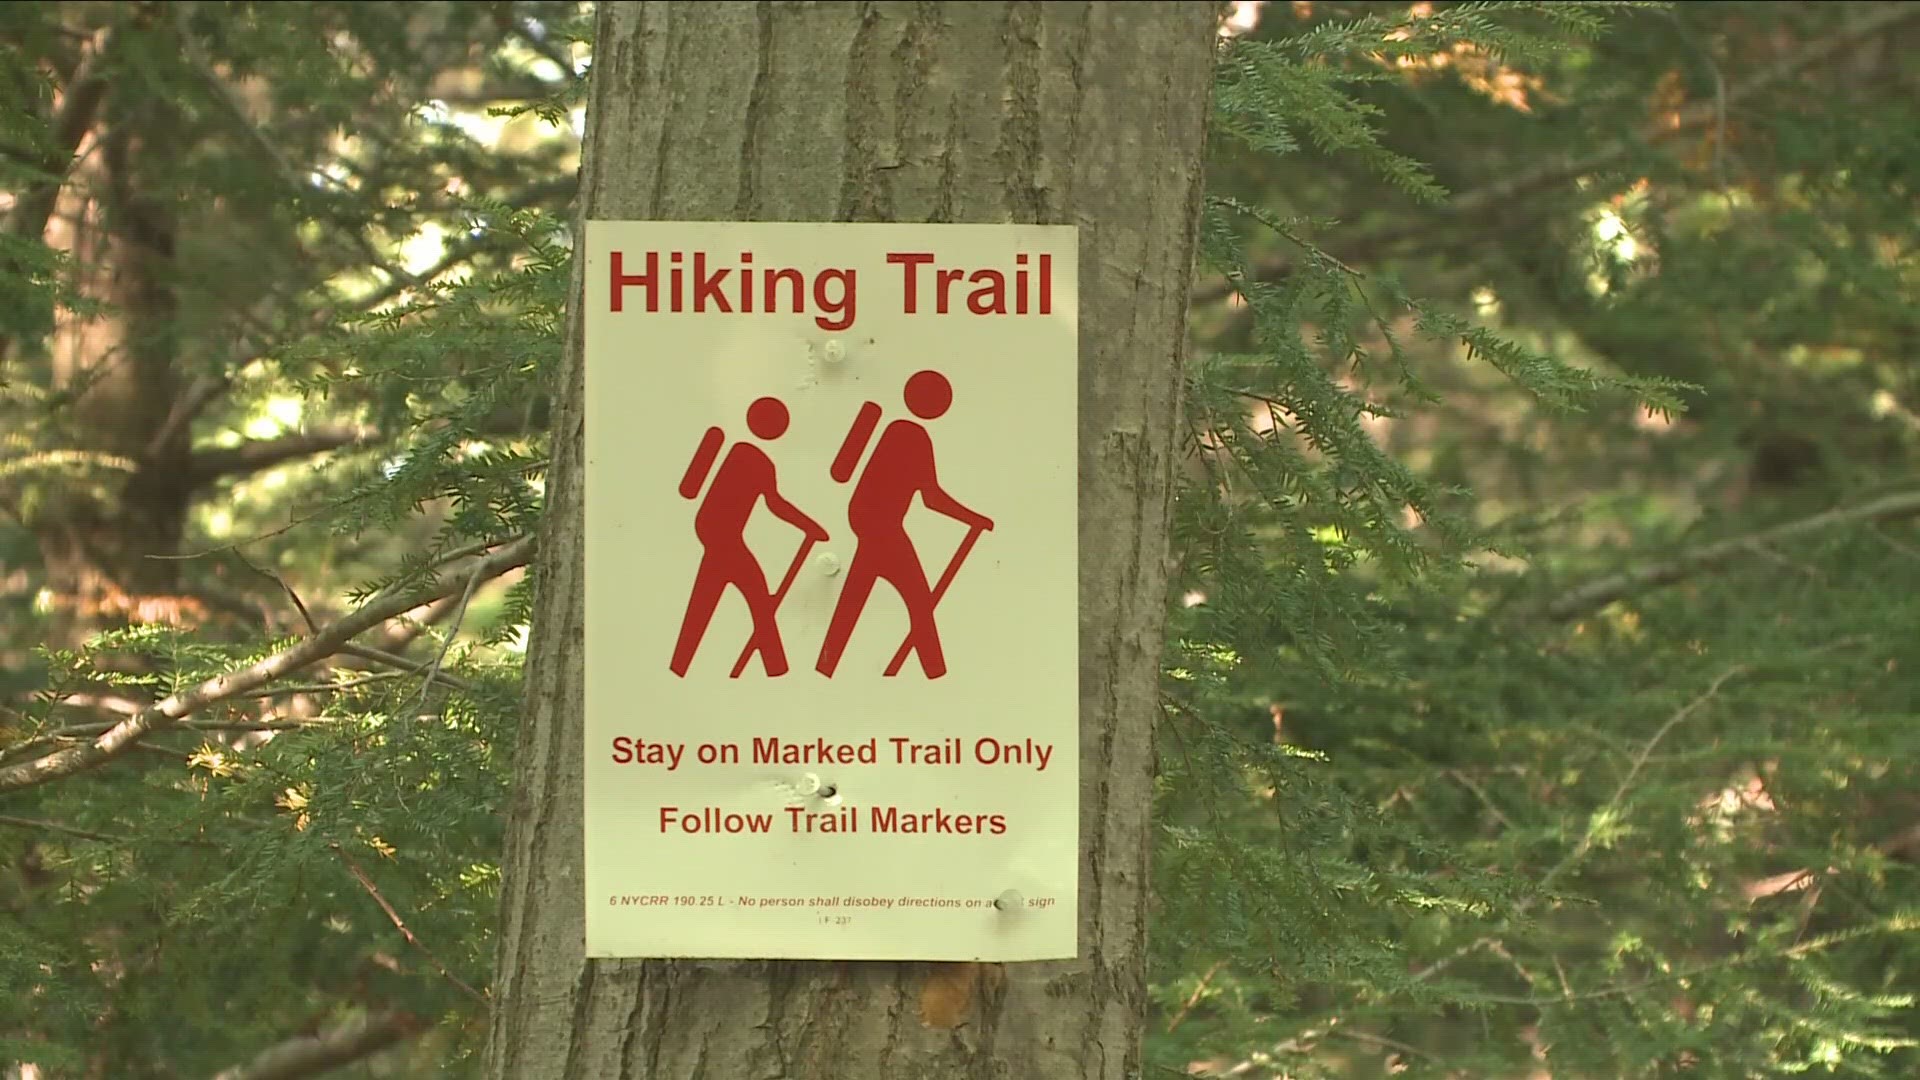 WNY Hiking Challenge launches May 1st